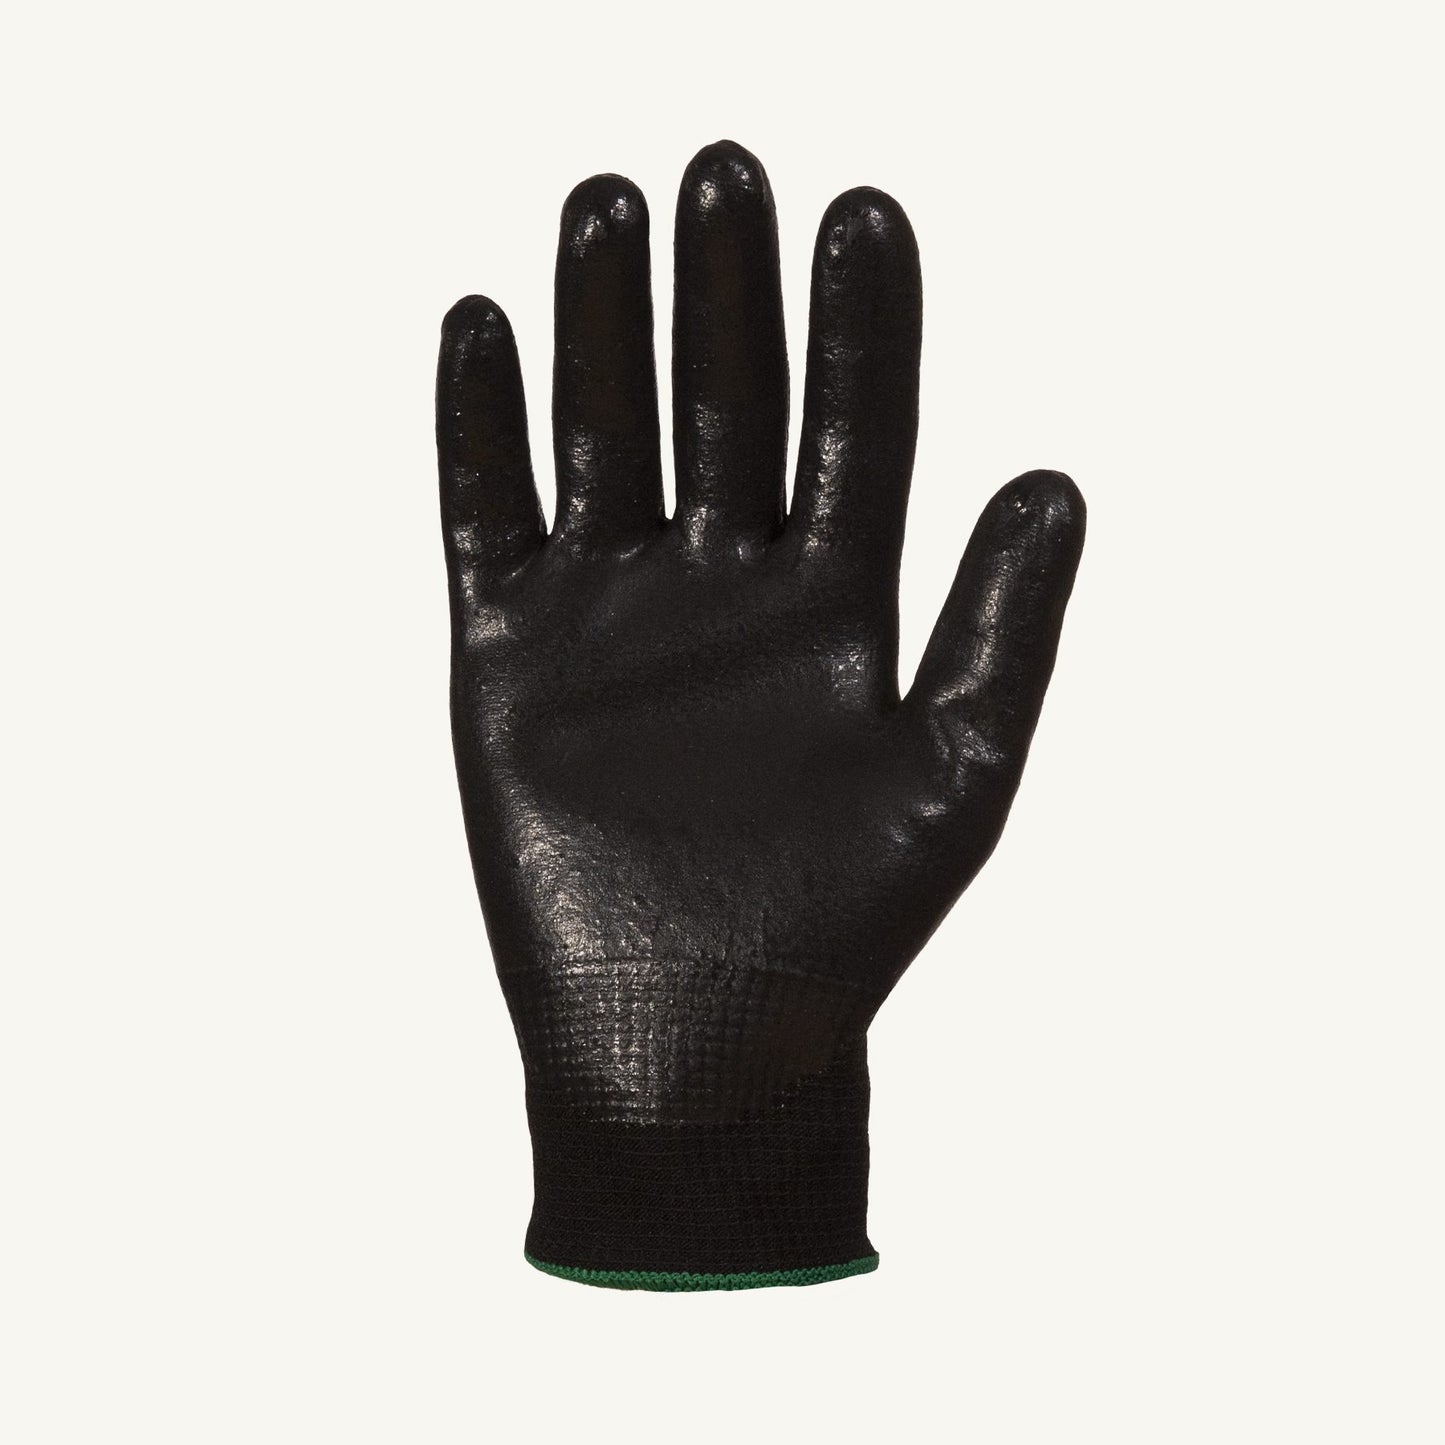 Superior Glove® Dexterity® S13BFNT Nitrile Dipped Work Gloves from Recycled Materials